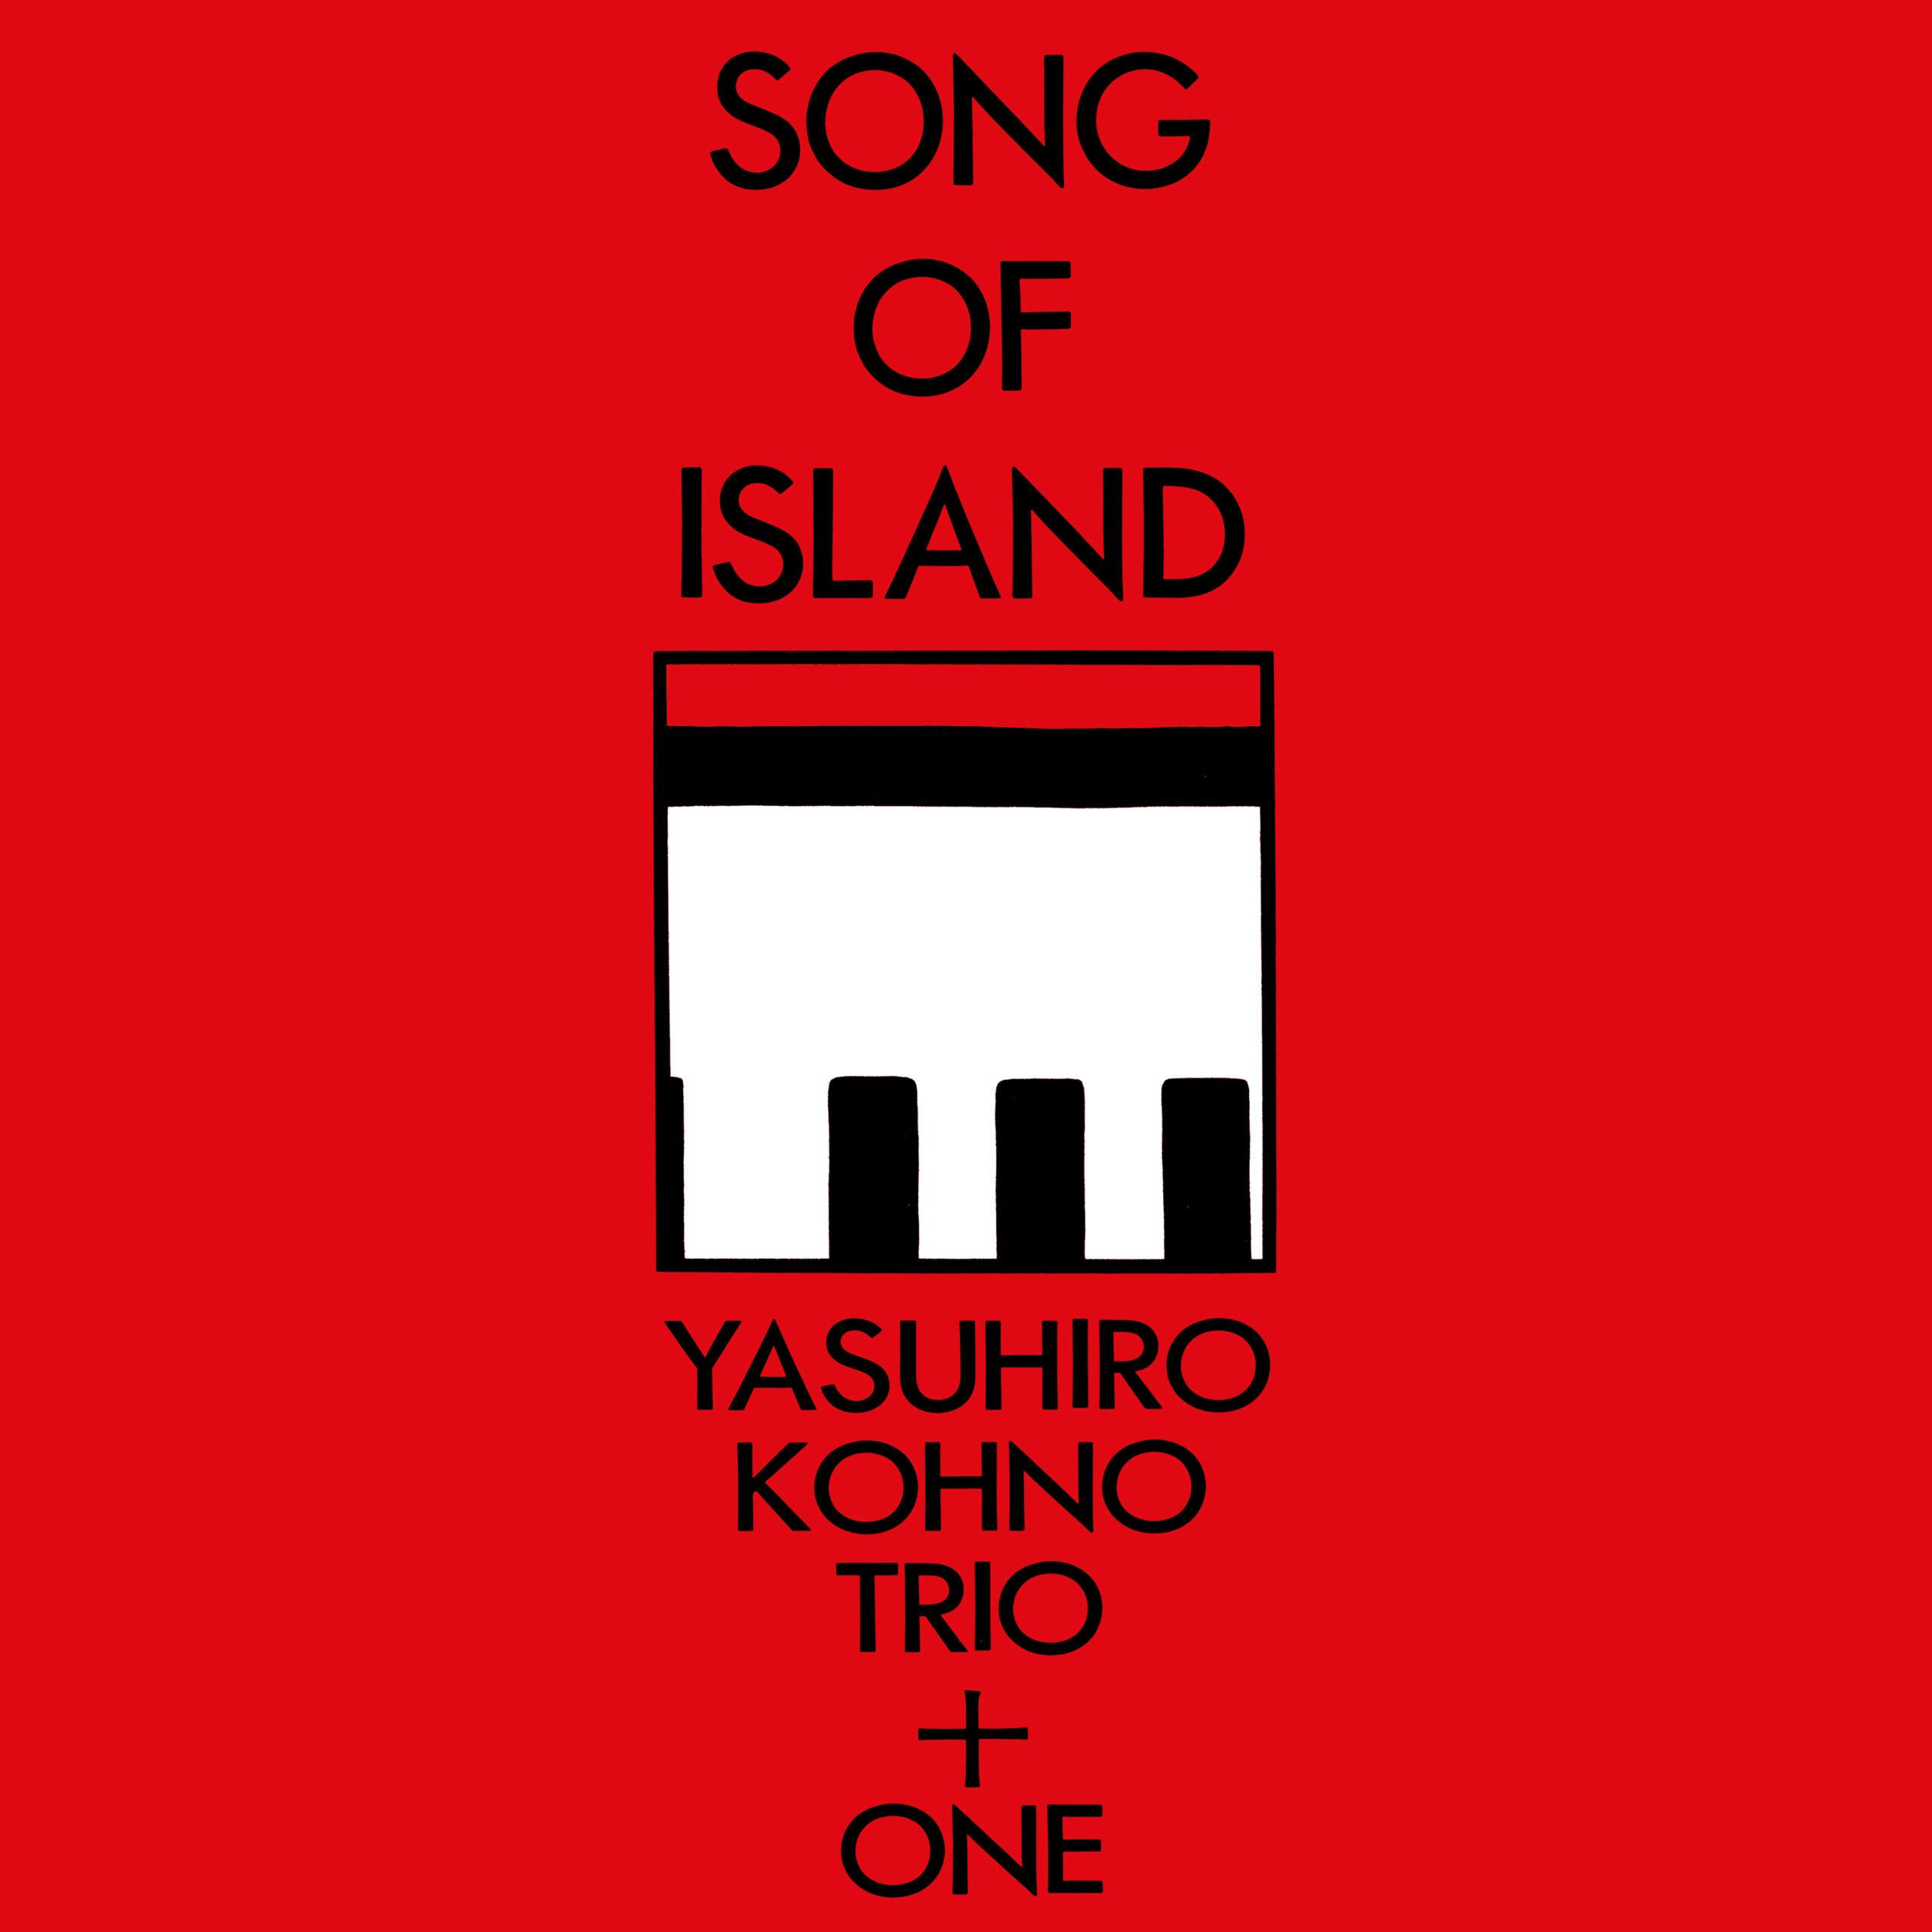 A private press rarity that few know of, ‘Song of Island’ was the third album from pianist Yasuhiro Kohno’s trio, recorded live at the jazz club and live house (gig venue) ‘Again’ in August 1985. Pressed up in small numbers, ‘Song for Island’ was issued on the private ASCAP Records, set up by pianist and band leader Yasuhiro Kohno.